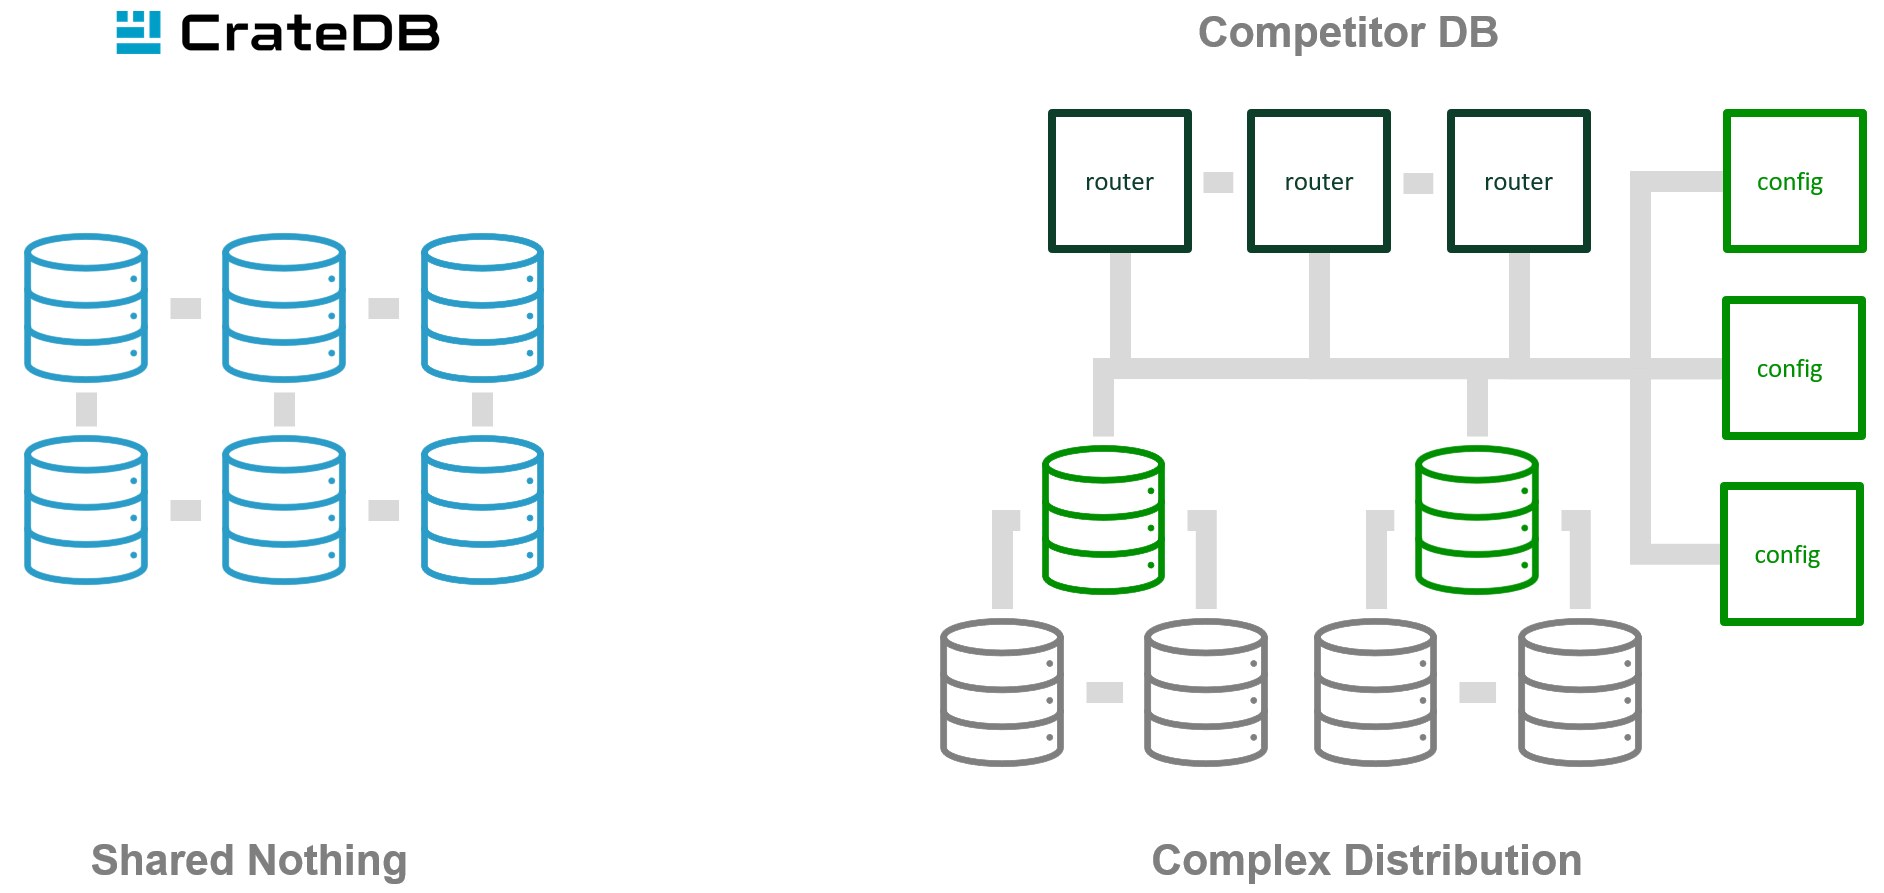 CrateDB Scaling Shared Nothing Architecture vs. competitor databases with a complex distribution